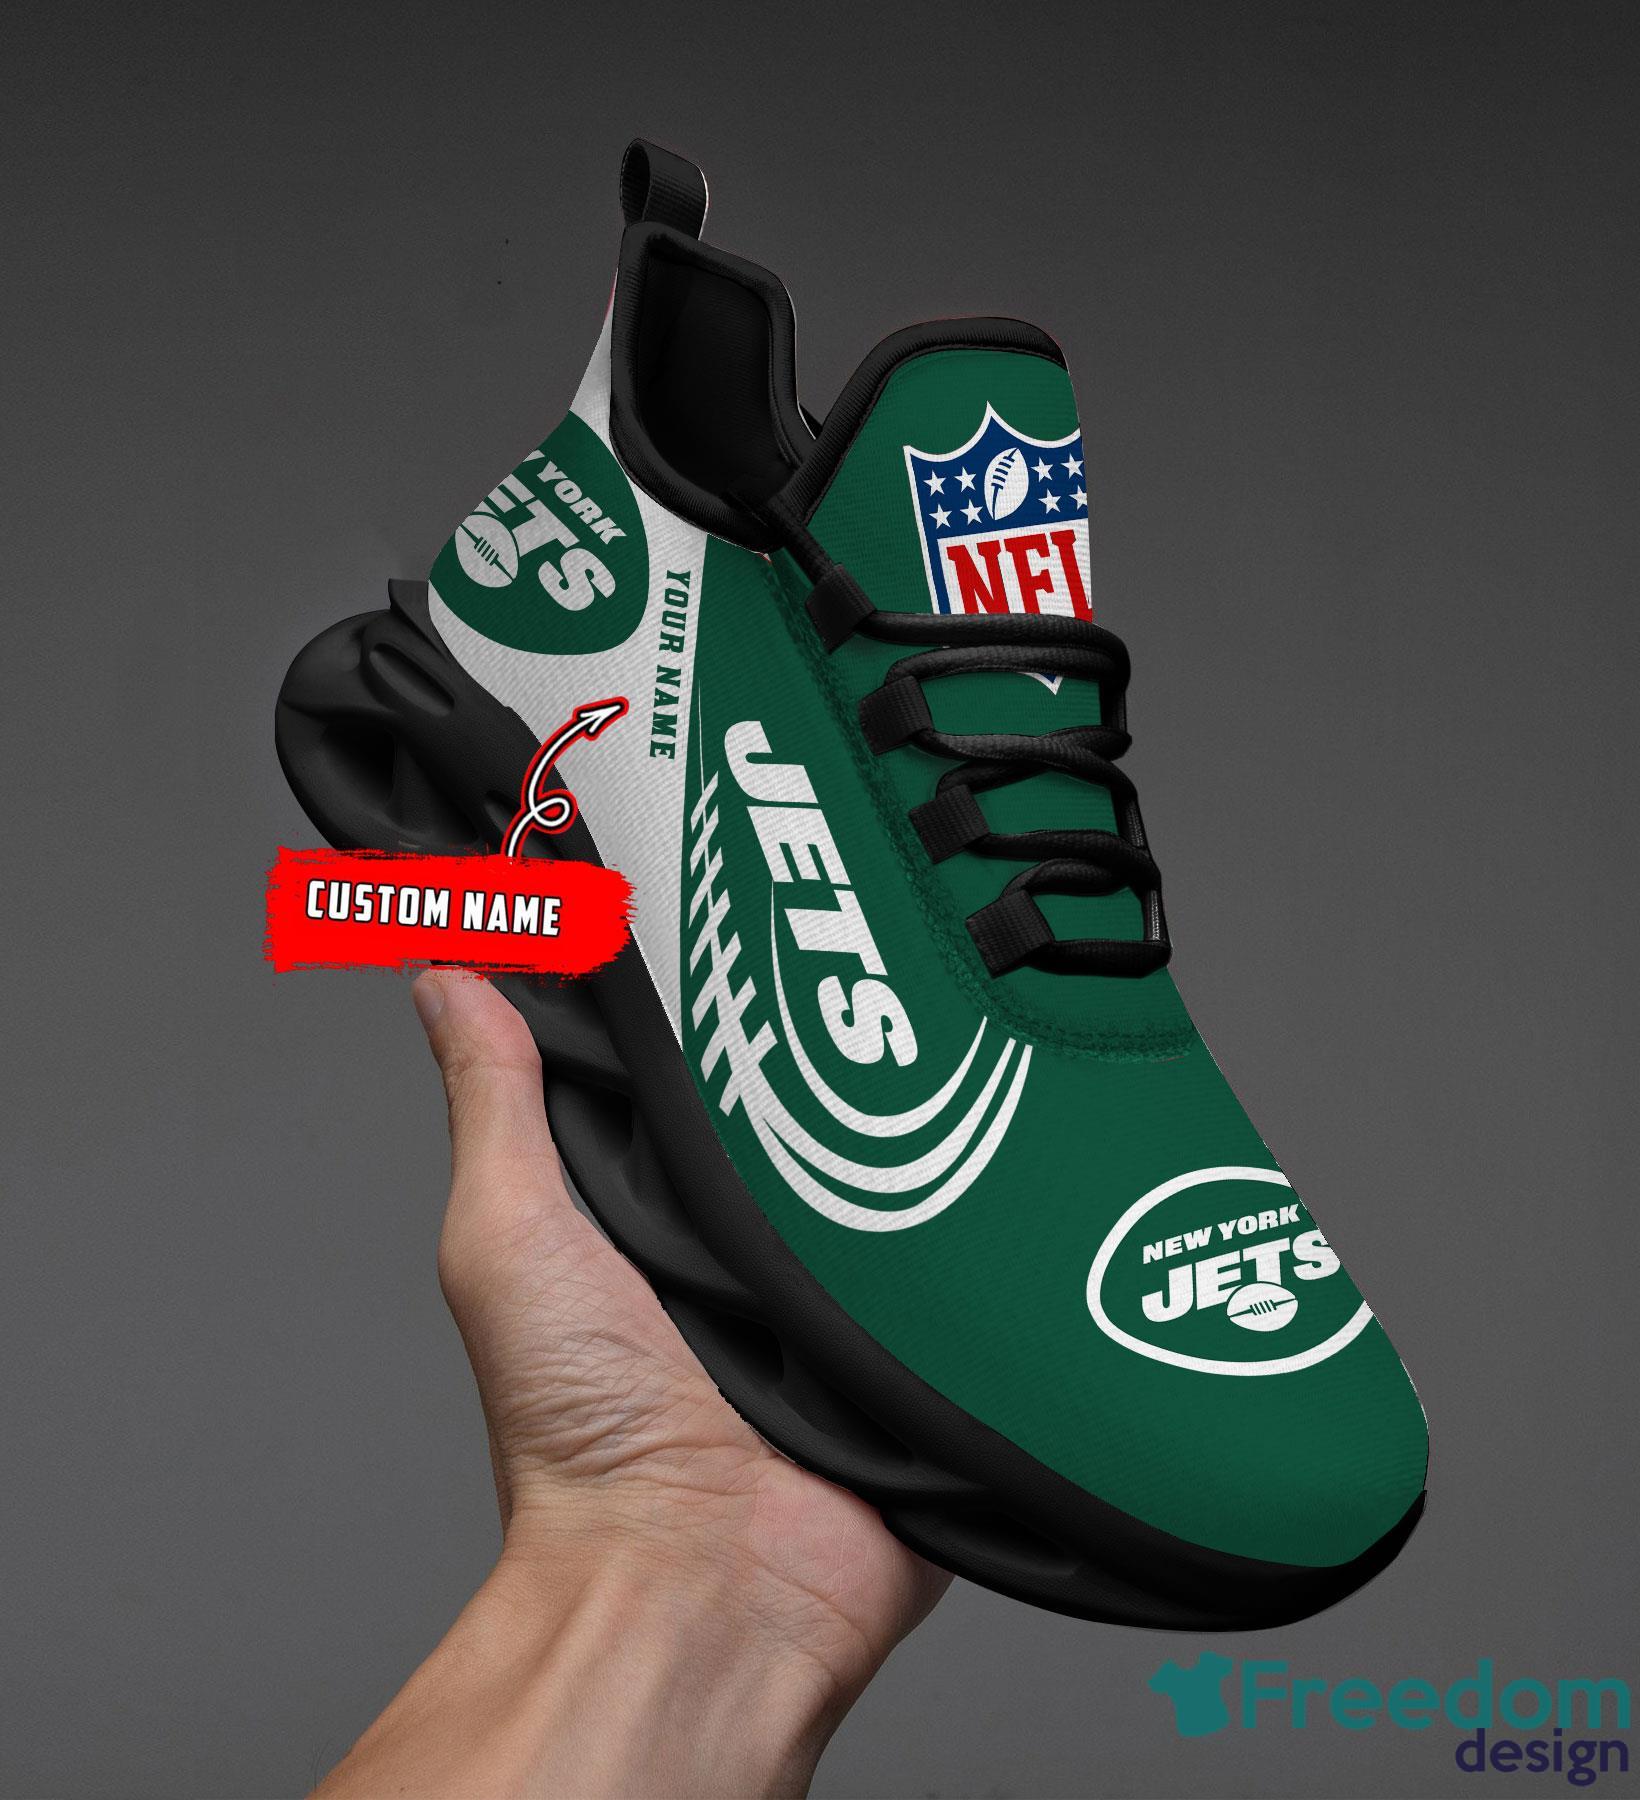 New York Jets NFL Max Soul Shoes Gift For Sport's Fans - Banantees